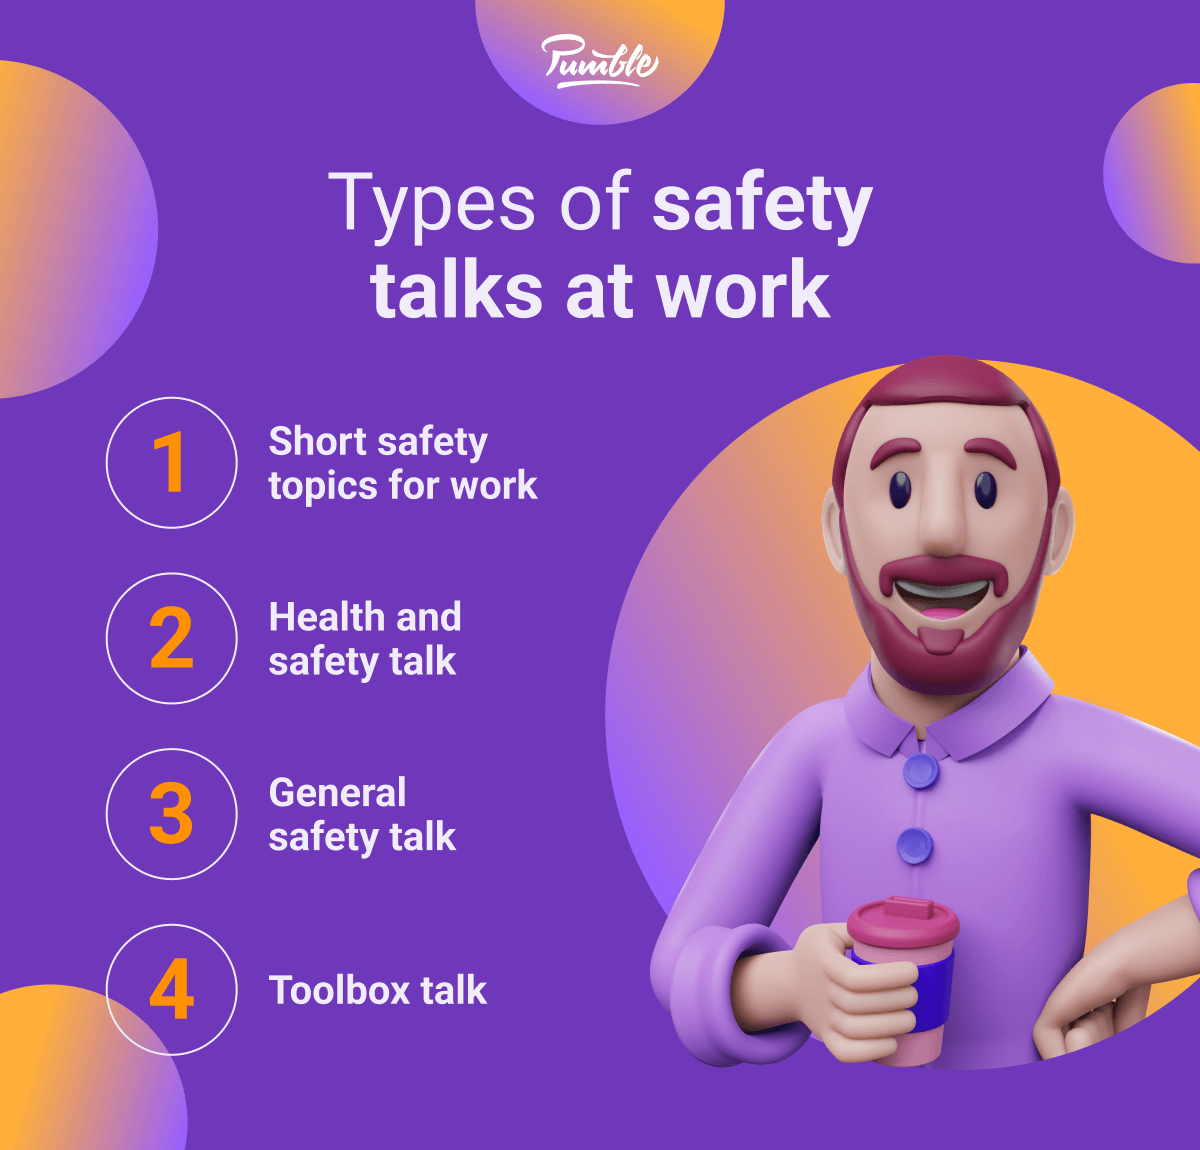 Types of safety talks at work